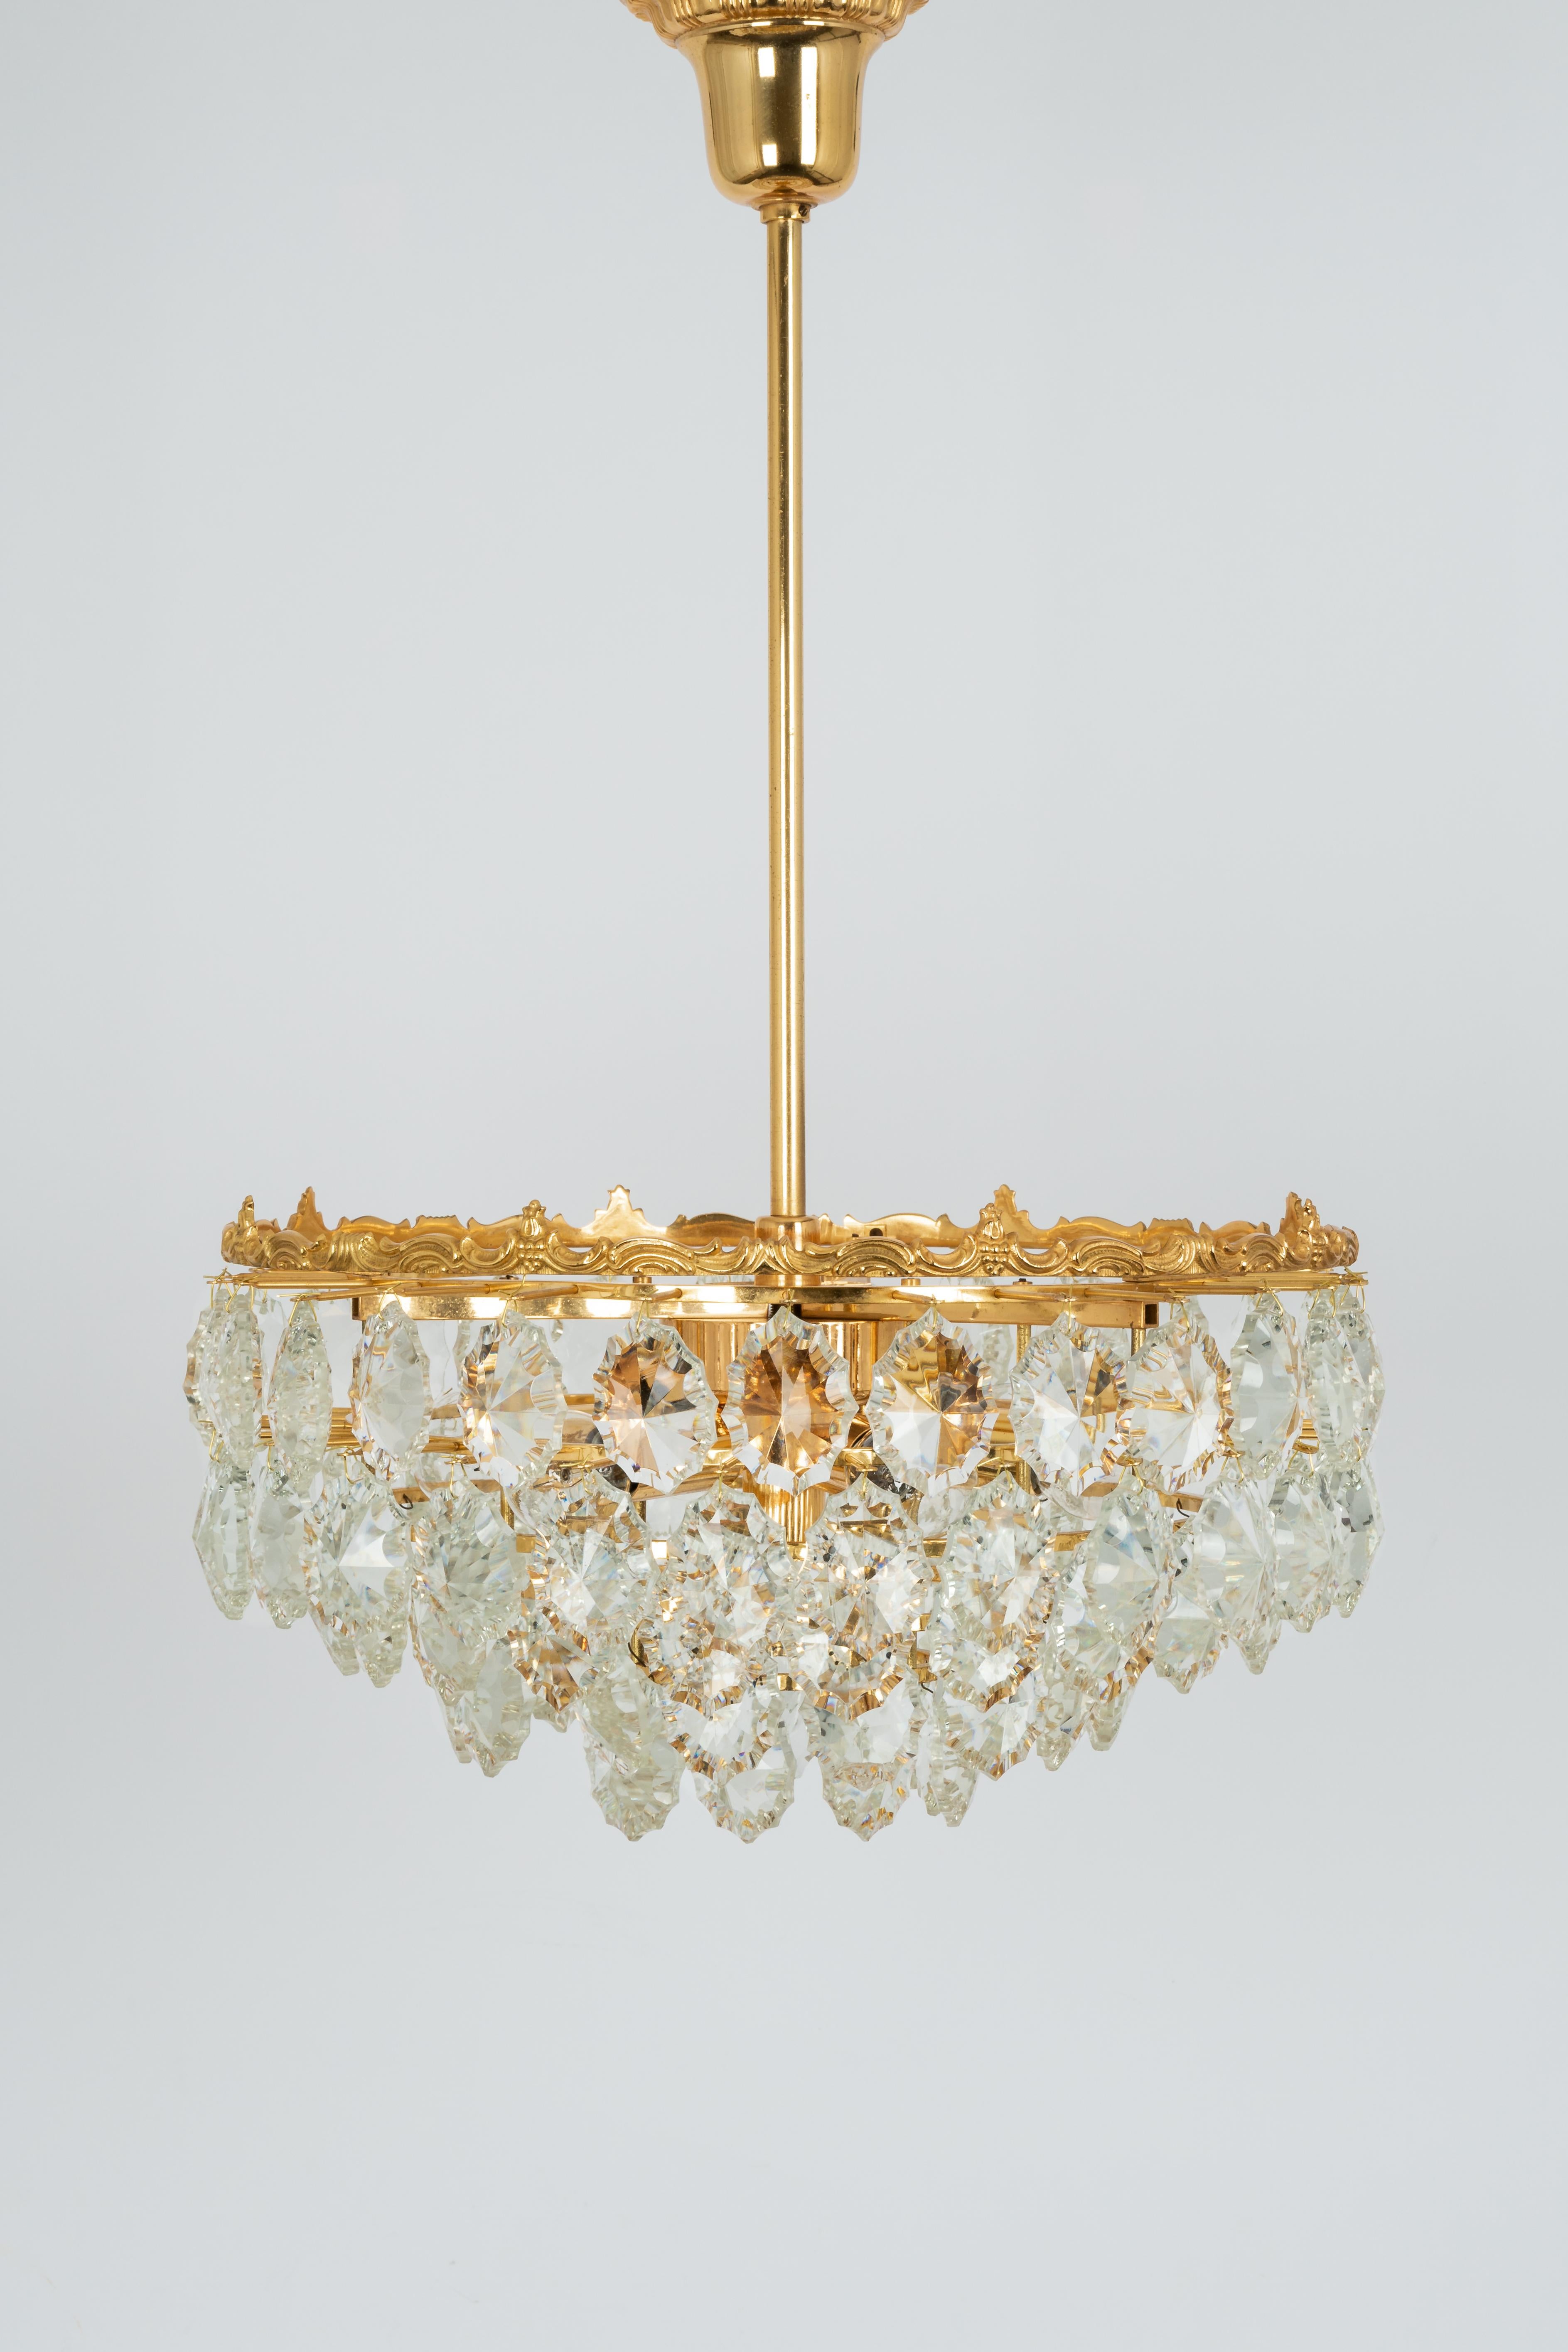 Bakalowits Chandelier, Brass and Crystal Glass, Austria, 1960s For Sale 3